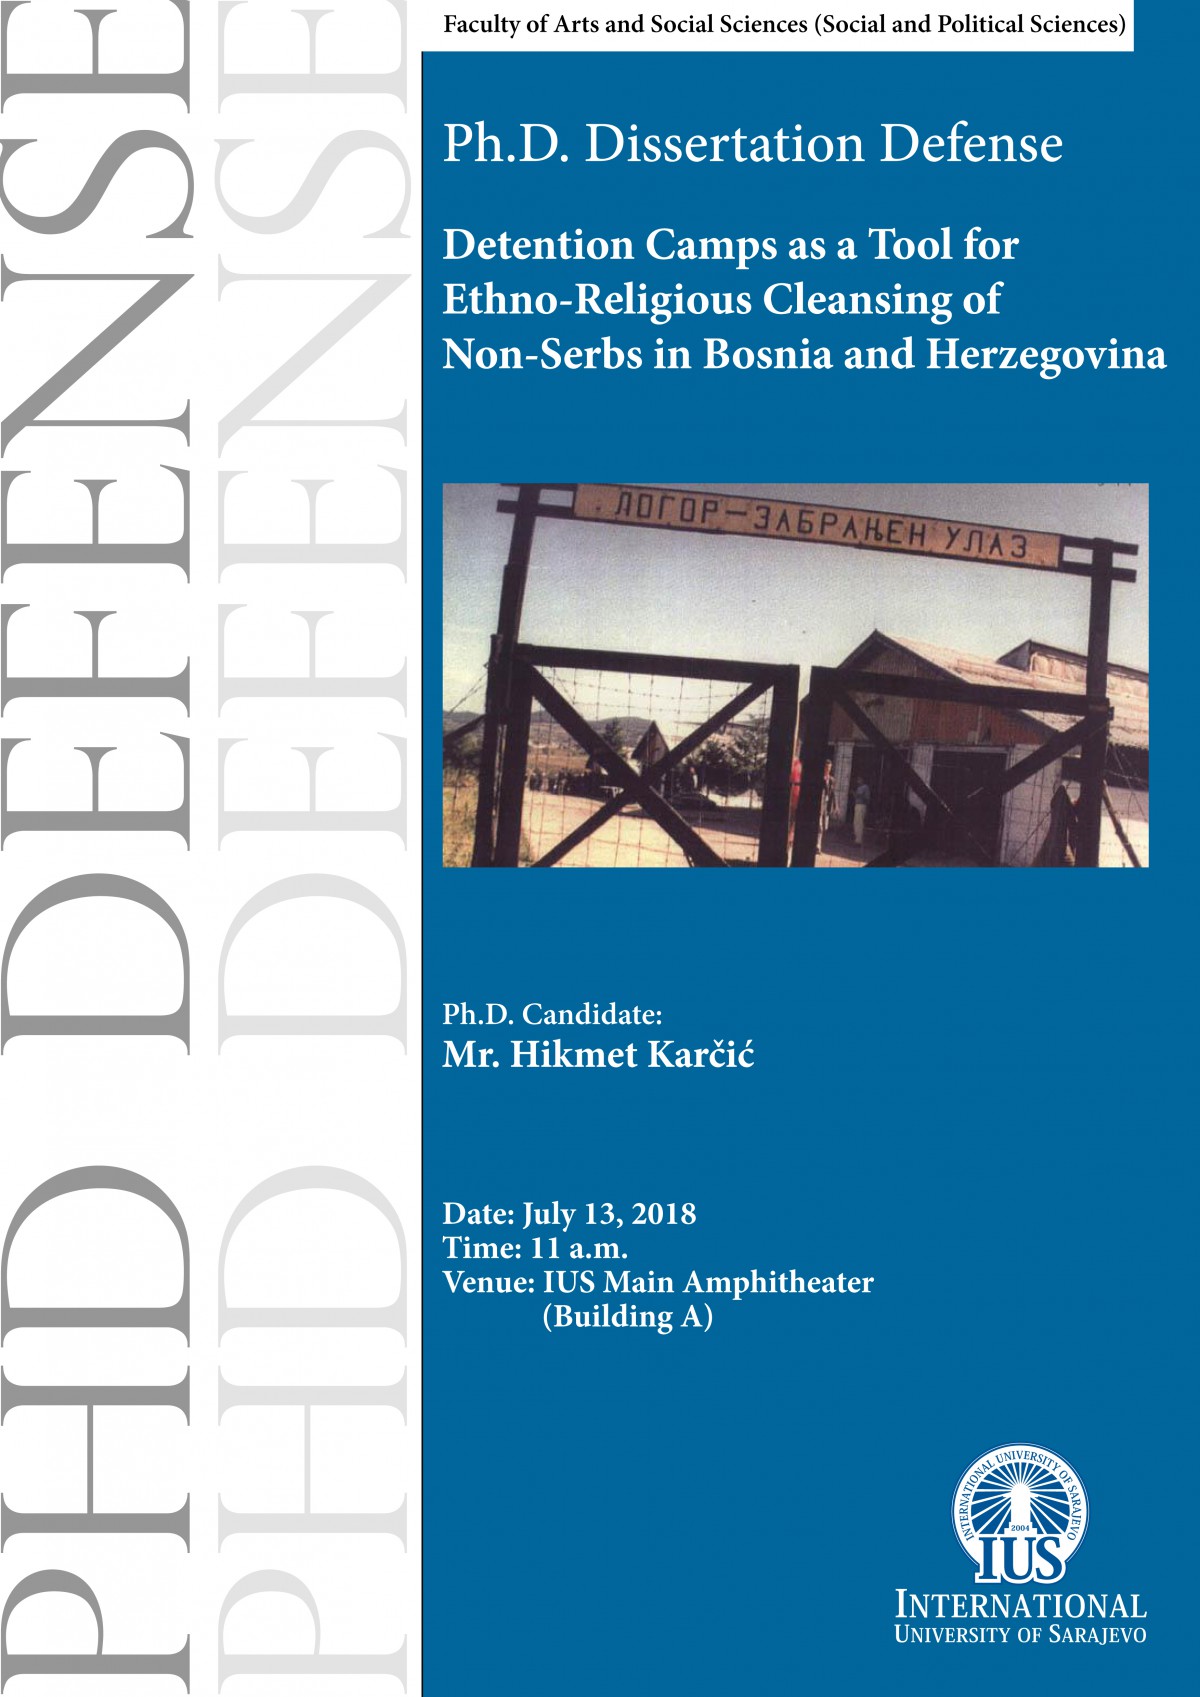  Detention Camps as a Tool for Ethno-Religious Cleansing of Non-Serbs in Bosnia and Herzegovina 